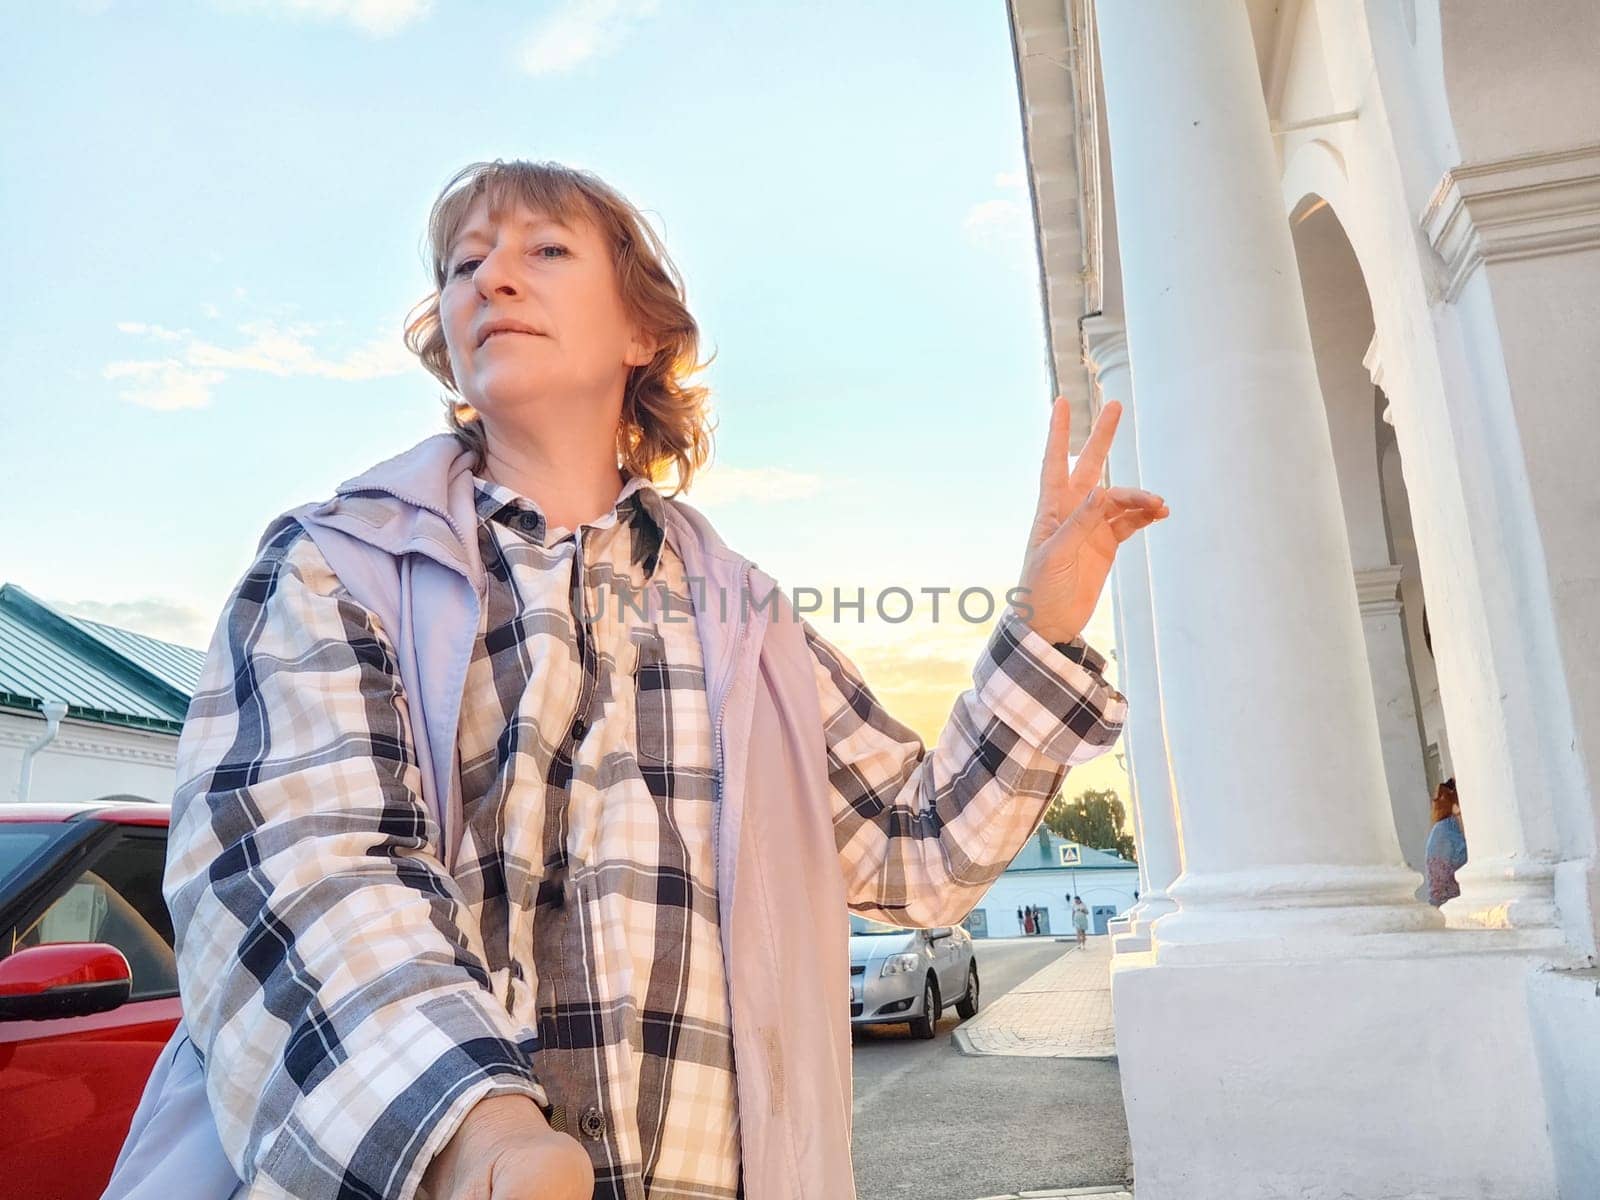 Portrait of middle-aged woman taking selfies in the city. Women's travel tourism. The blogger poses